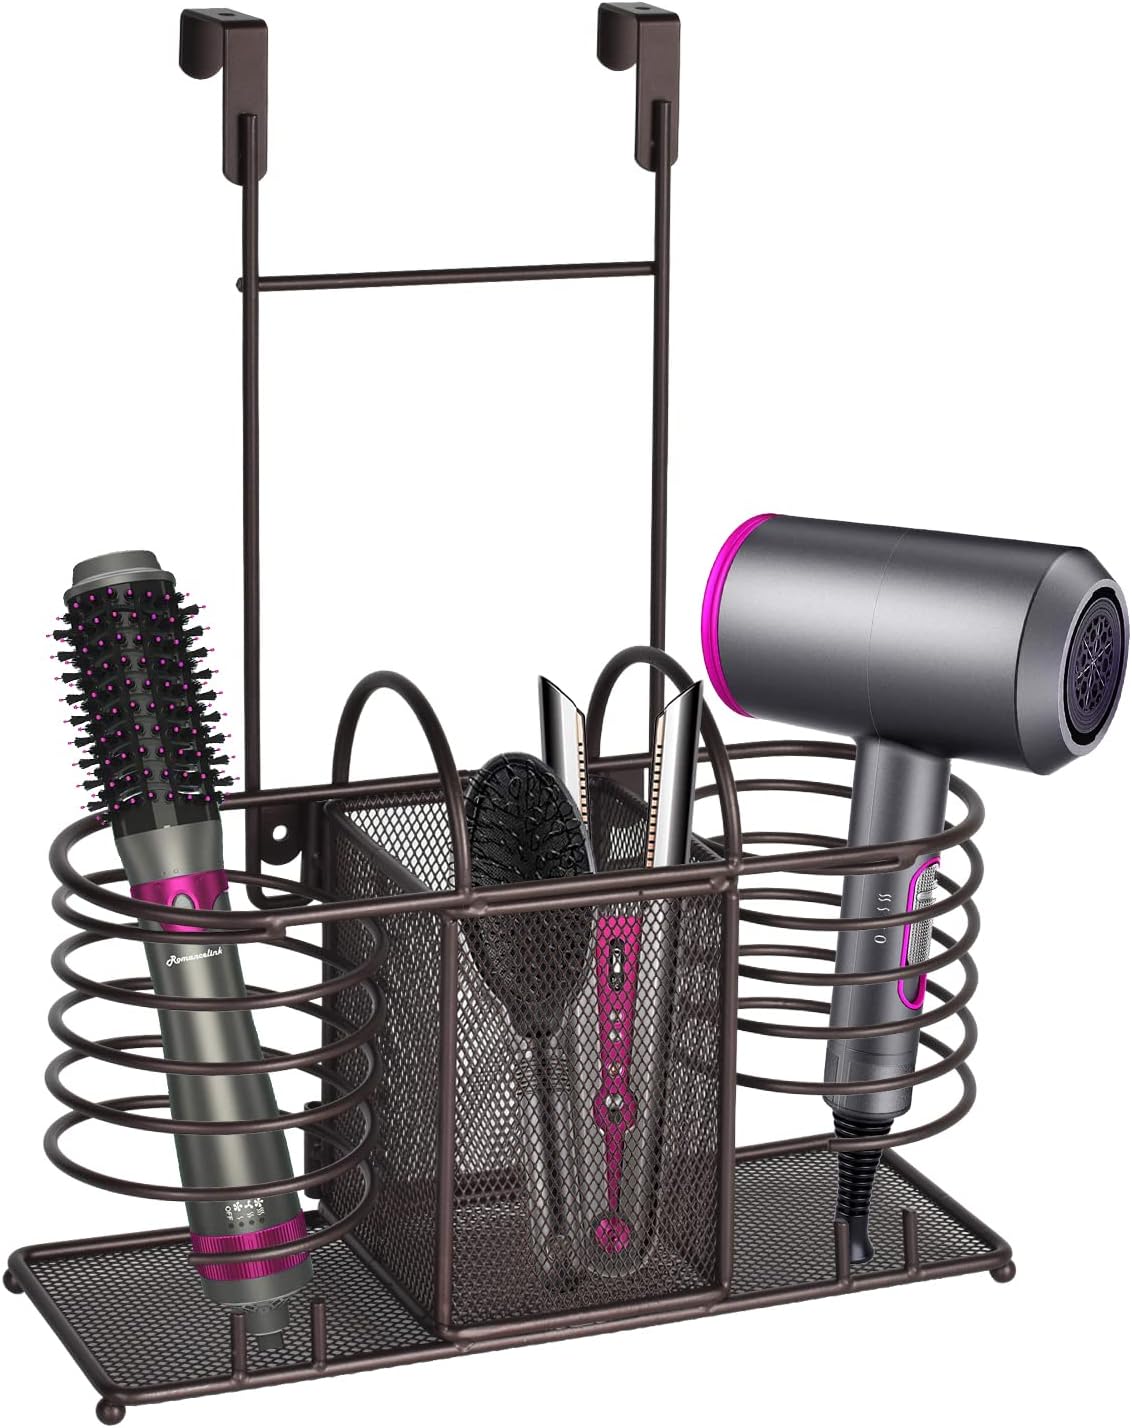 Sunlit 3 in 1 Wall Mount/Countertop/Over Cabinet Door Metal Wire Hair Product & Styling Tool Organizer Storage Basket Holder for Hair Dryer, Brushes, Flat Iron, Curling Wand, Hair Straightener. Black